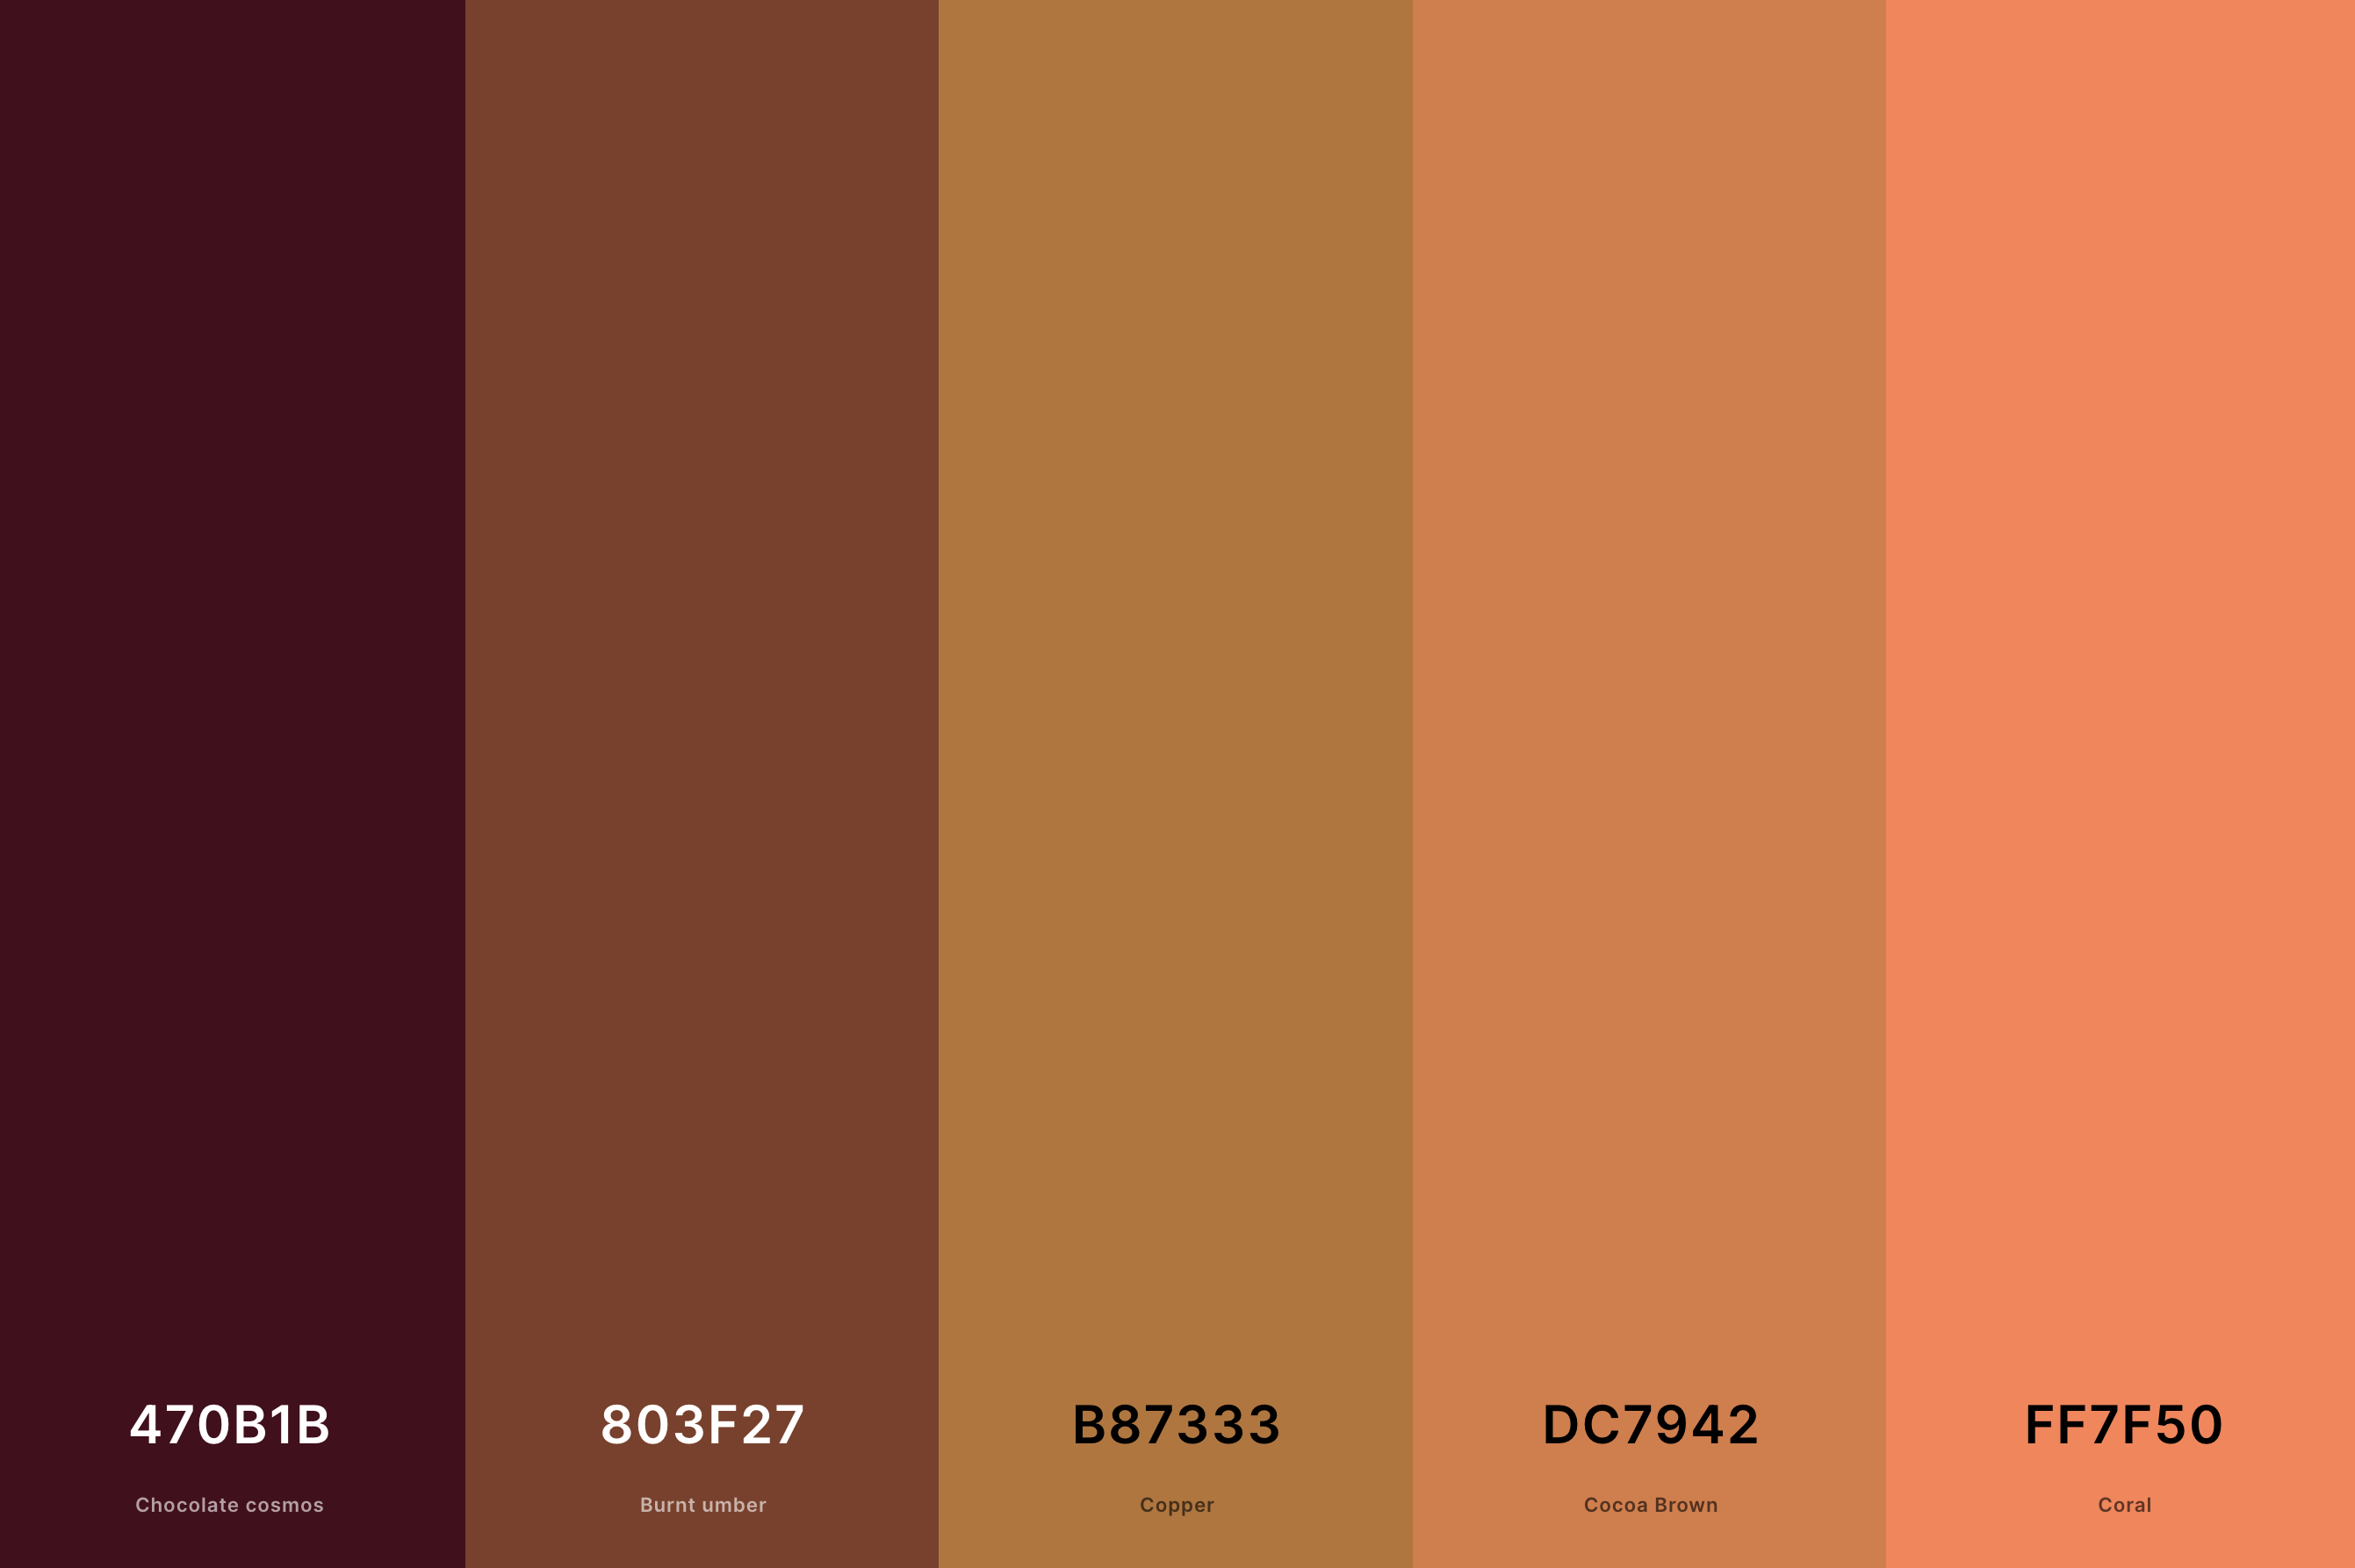 27. Coral Copper Color Palette Color Palette with Chocolate Cosmos (Hex #470B1B) + Burnt Umber (Hex #803F27) + Copper (Hex #B87333) + Cocoa Brown (Hex #DC7942) + Coral (Hex #FF7F50) Color Palette with Hex Codes